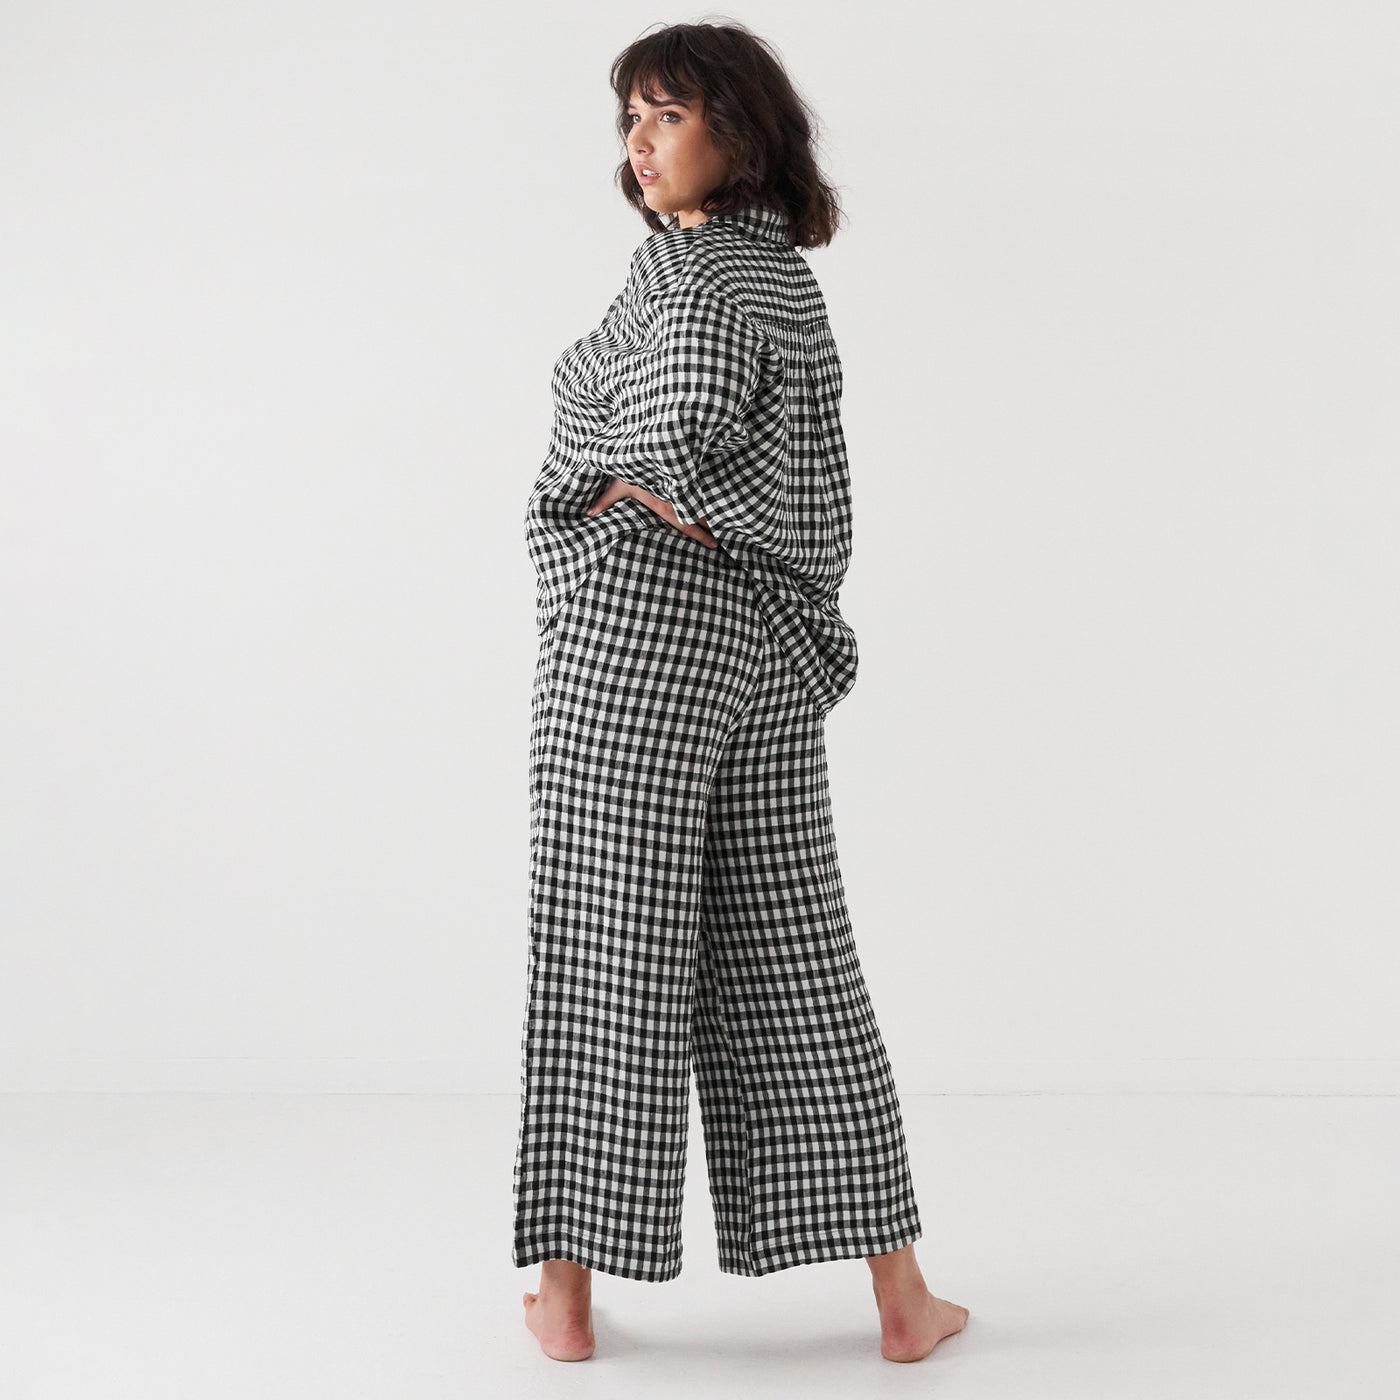 French Flax Linen Lounge Pant in Charcoal Gingham